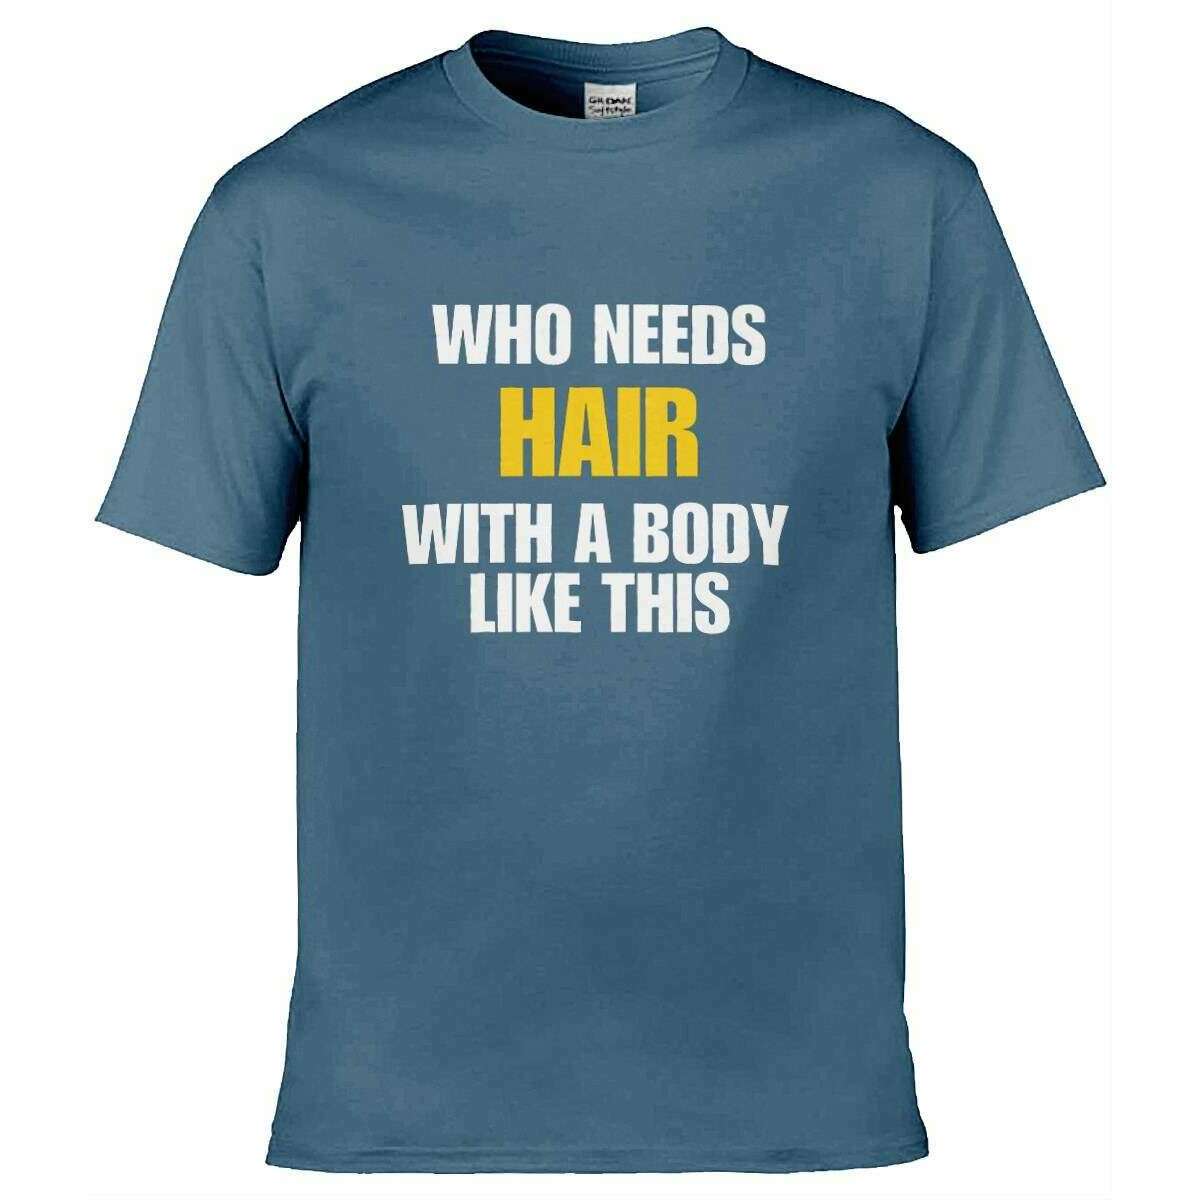 Teemarkable! Who Needs Hair With a Body Like This T-Shirt